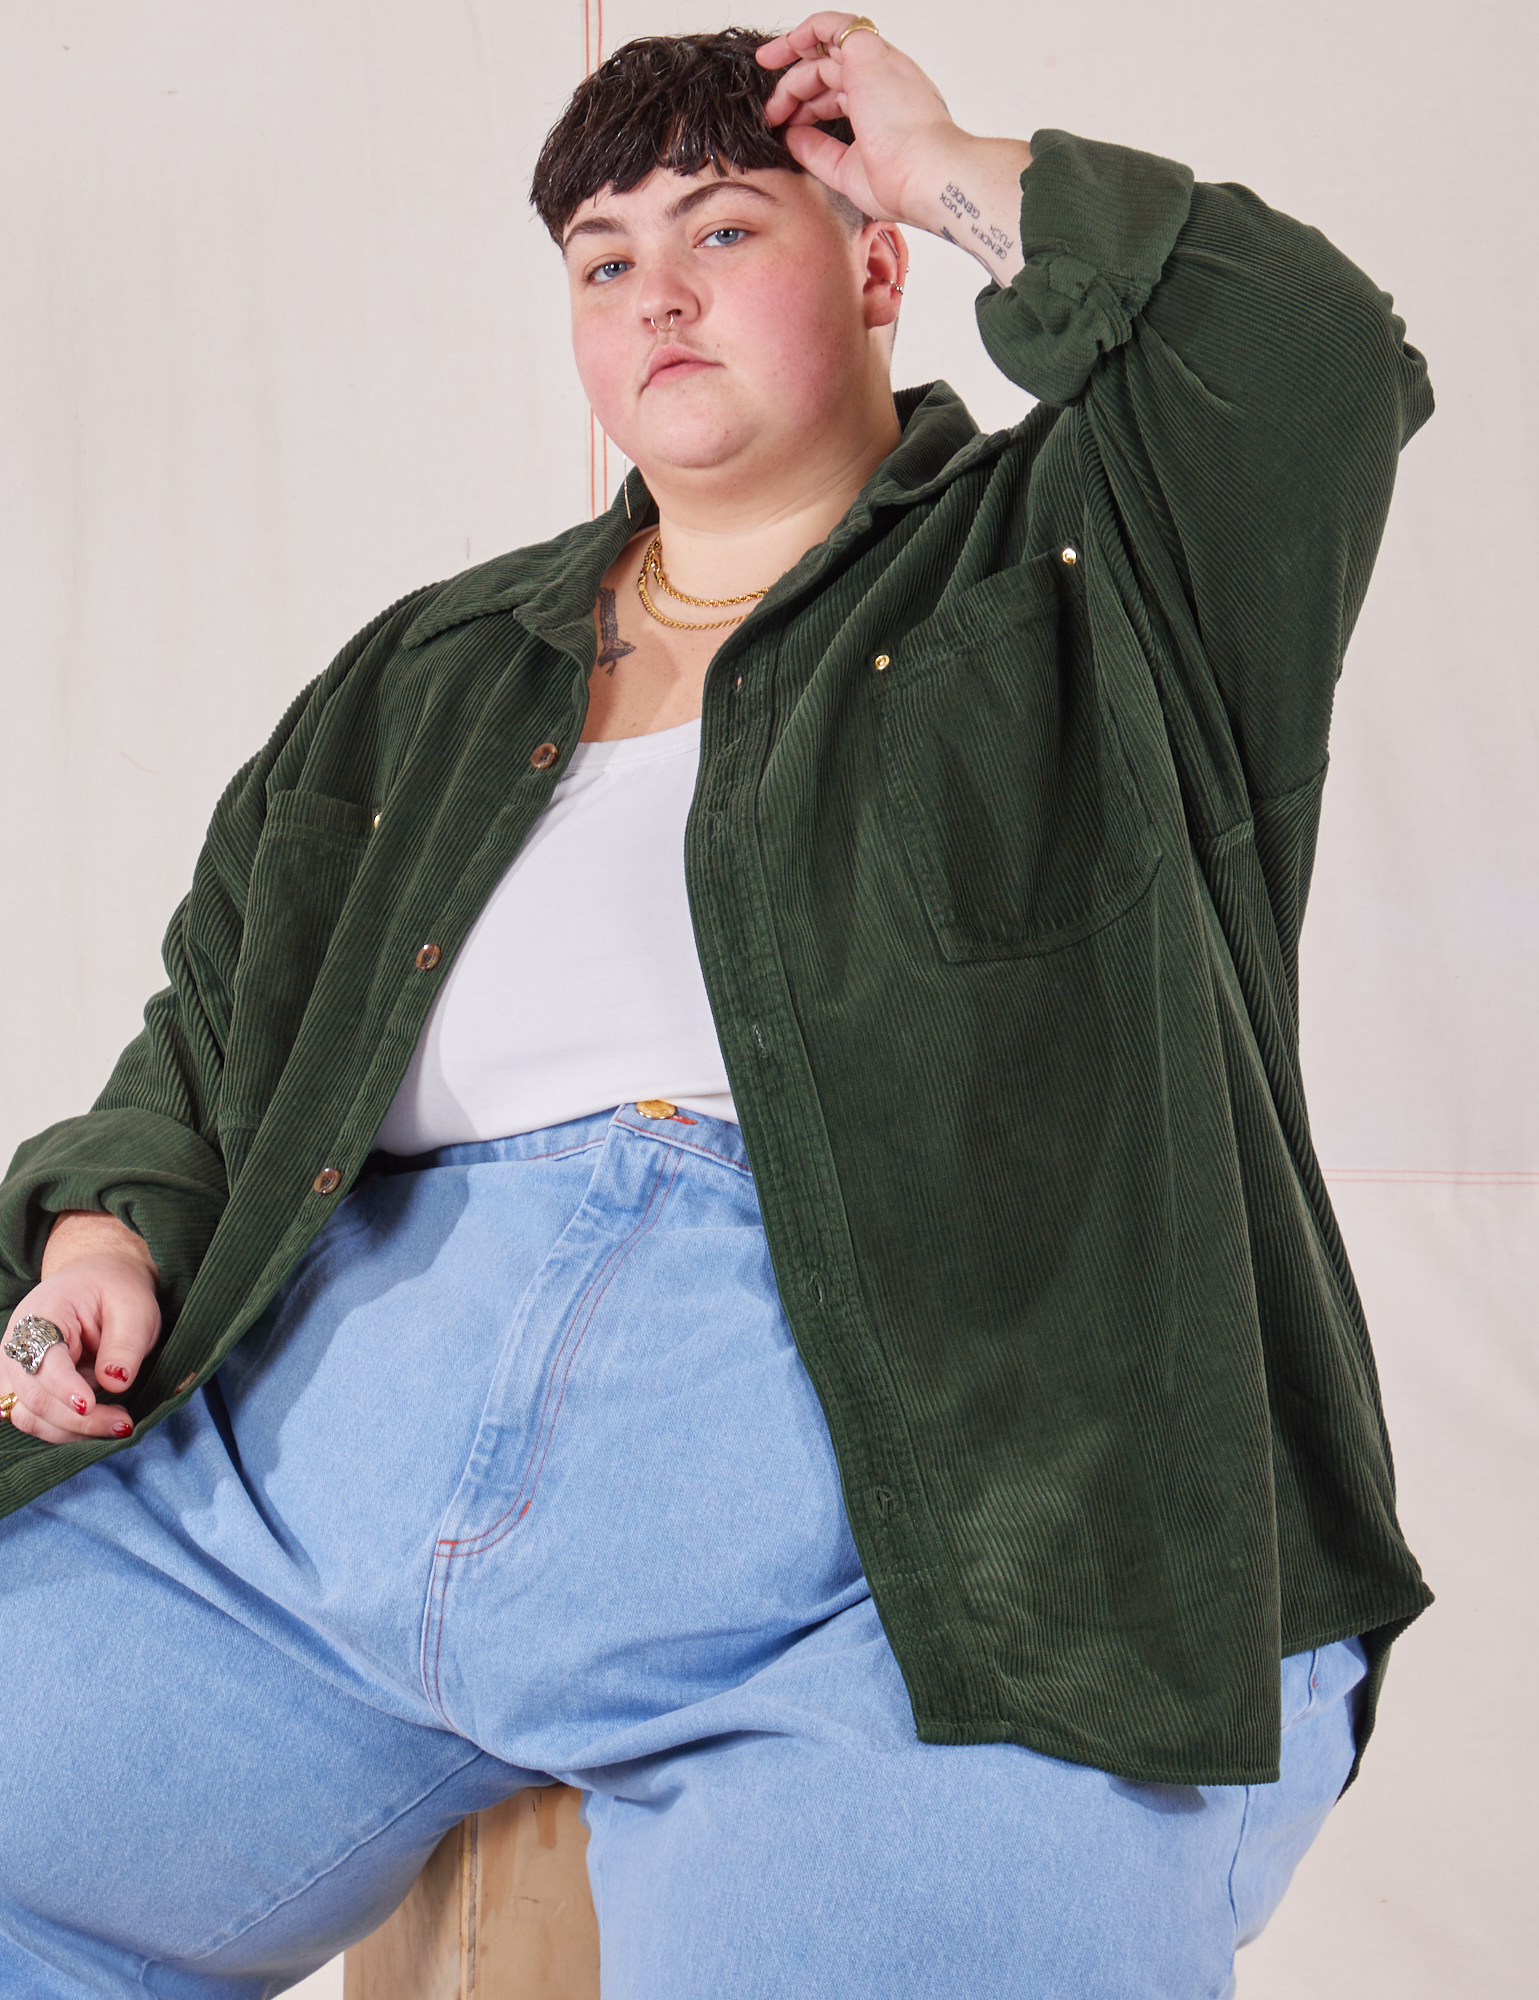 Jordan is wearing Corduroy Overshirt in Swamp Green and light wash Trouser Jeans